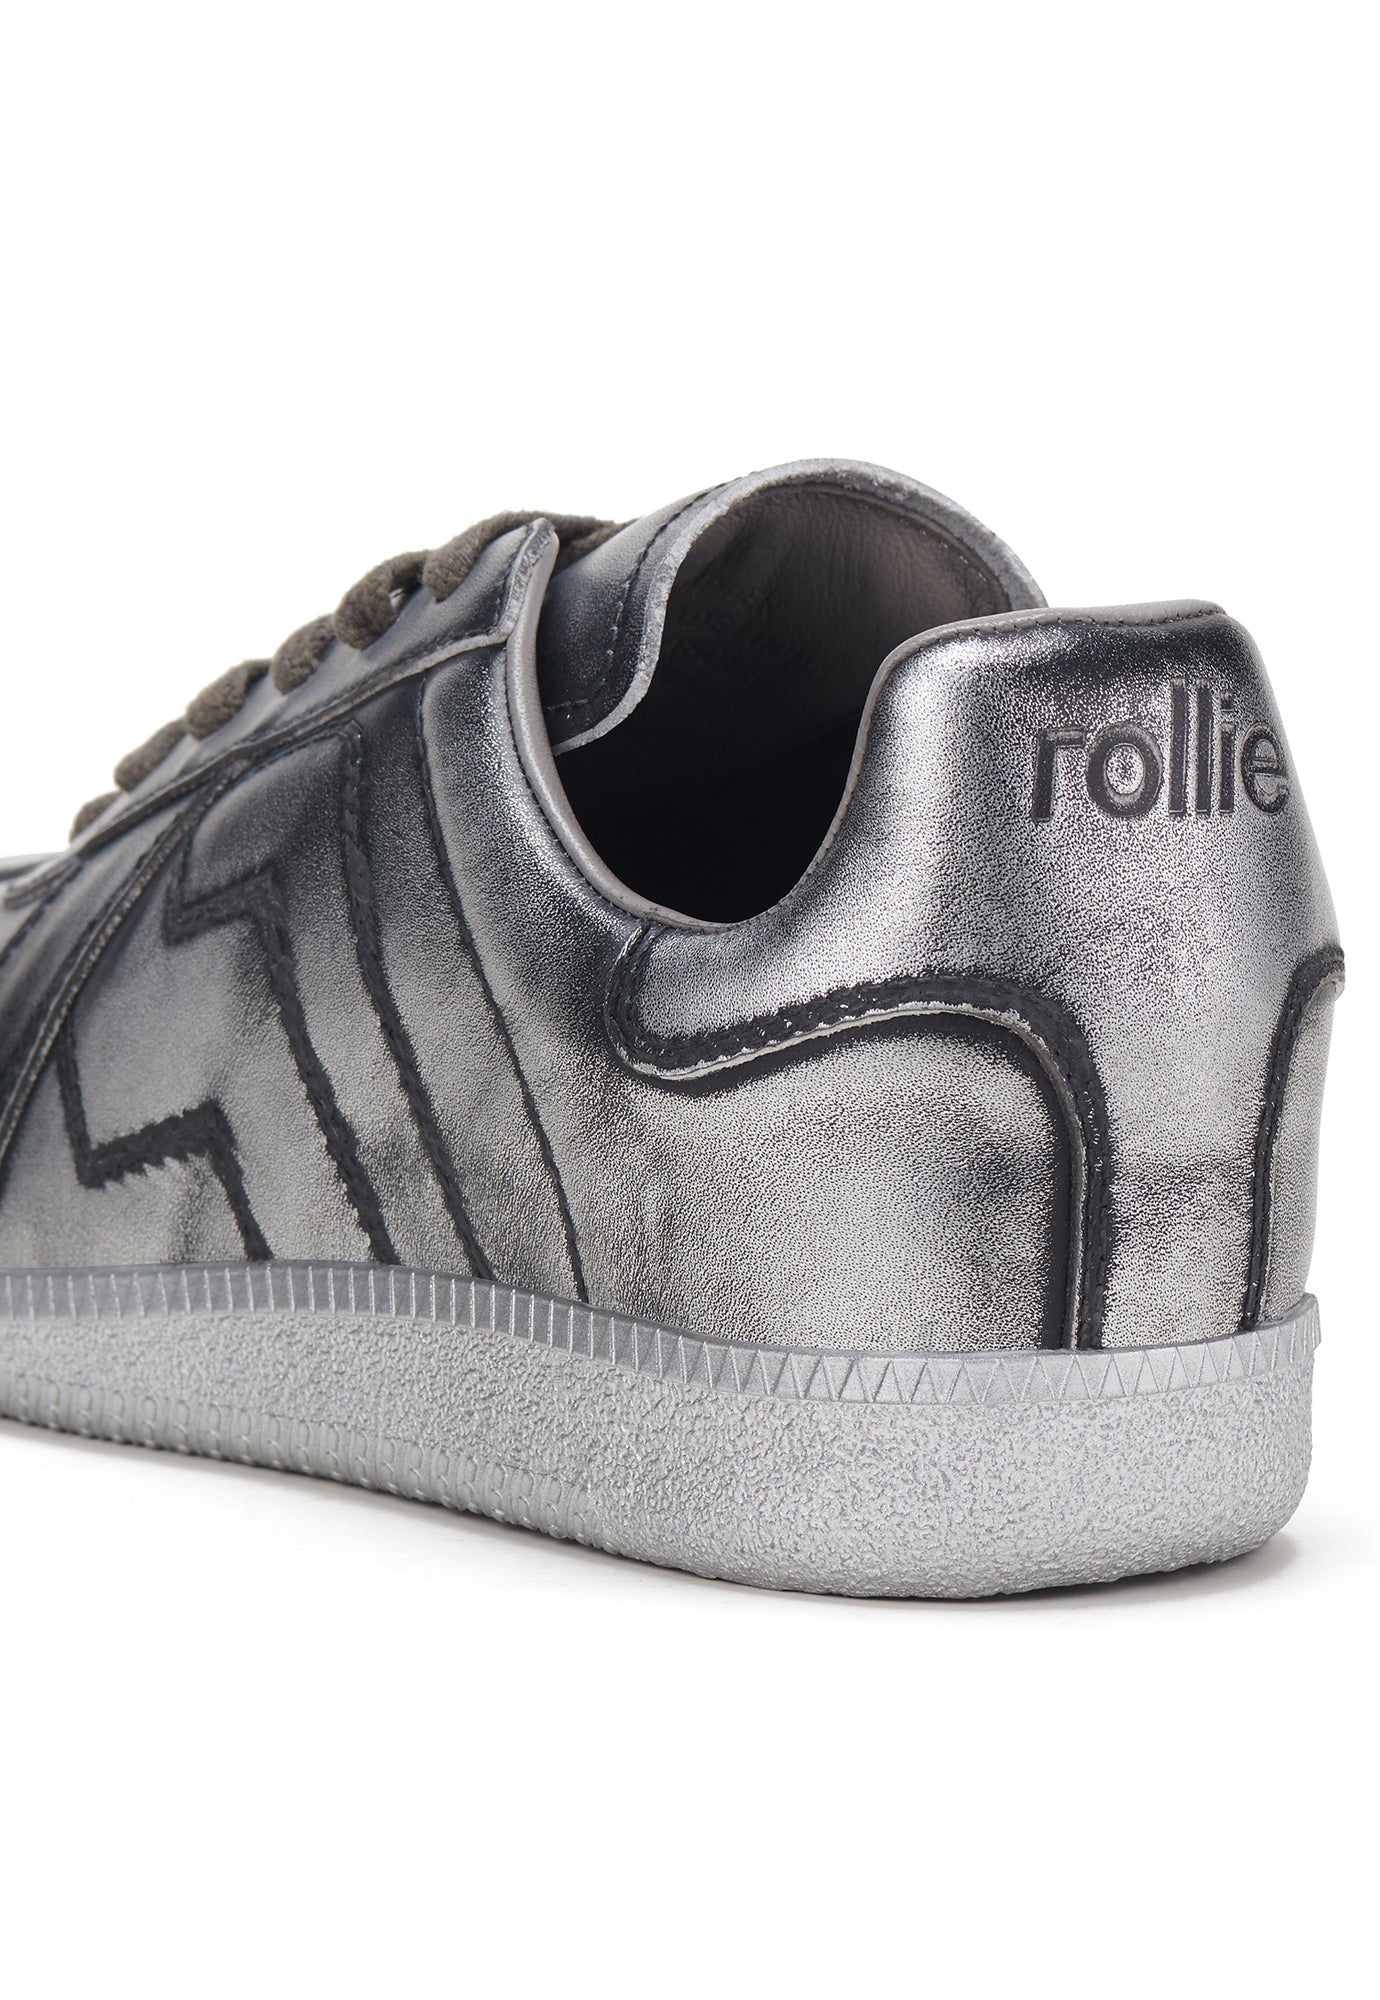 rollie - pace - all brushed silver